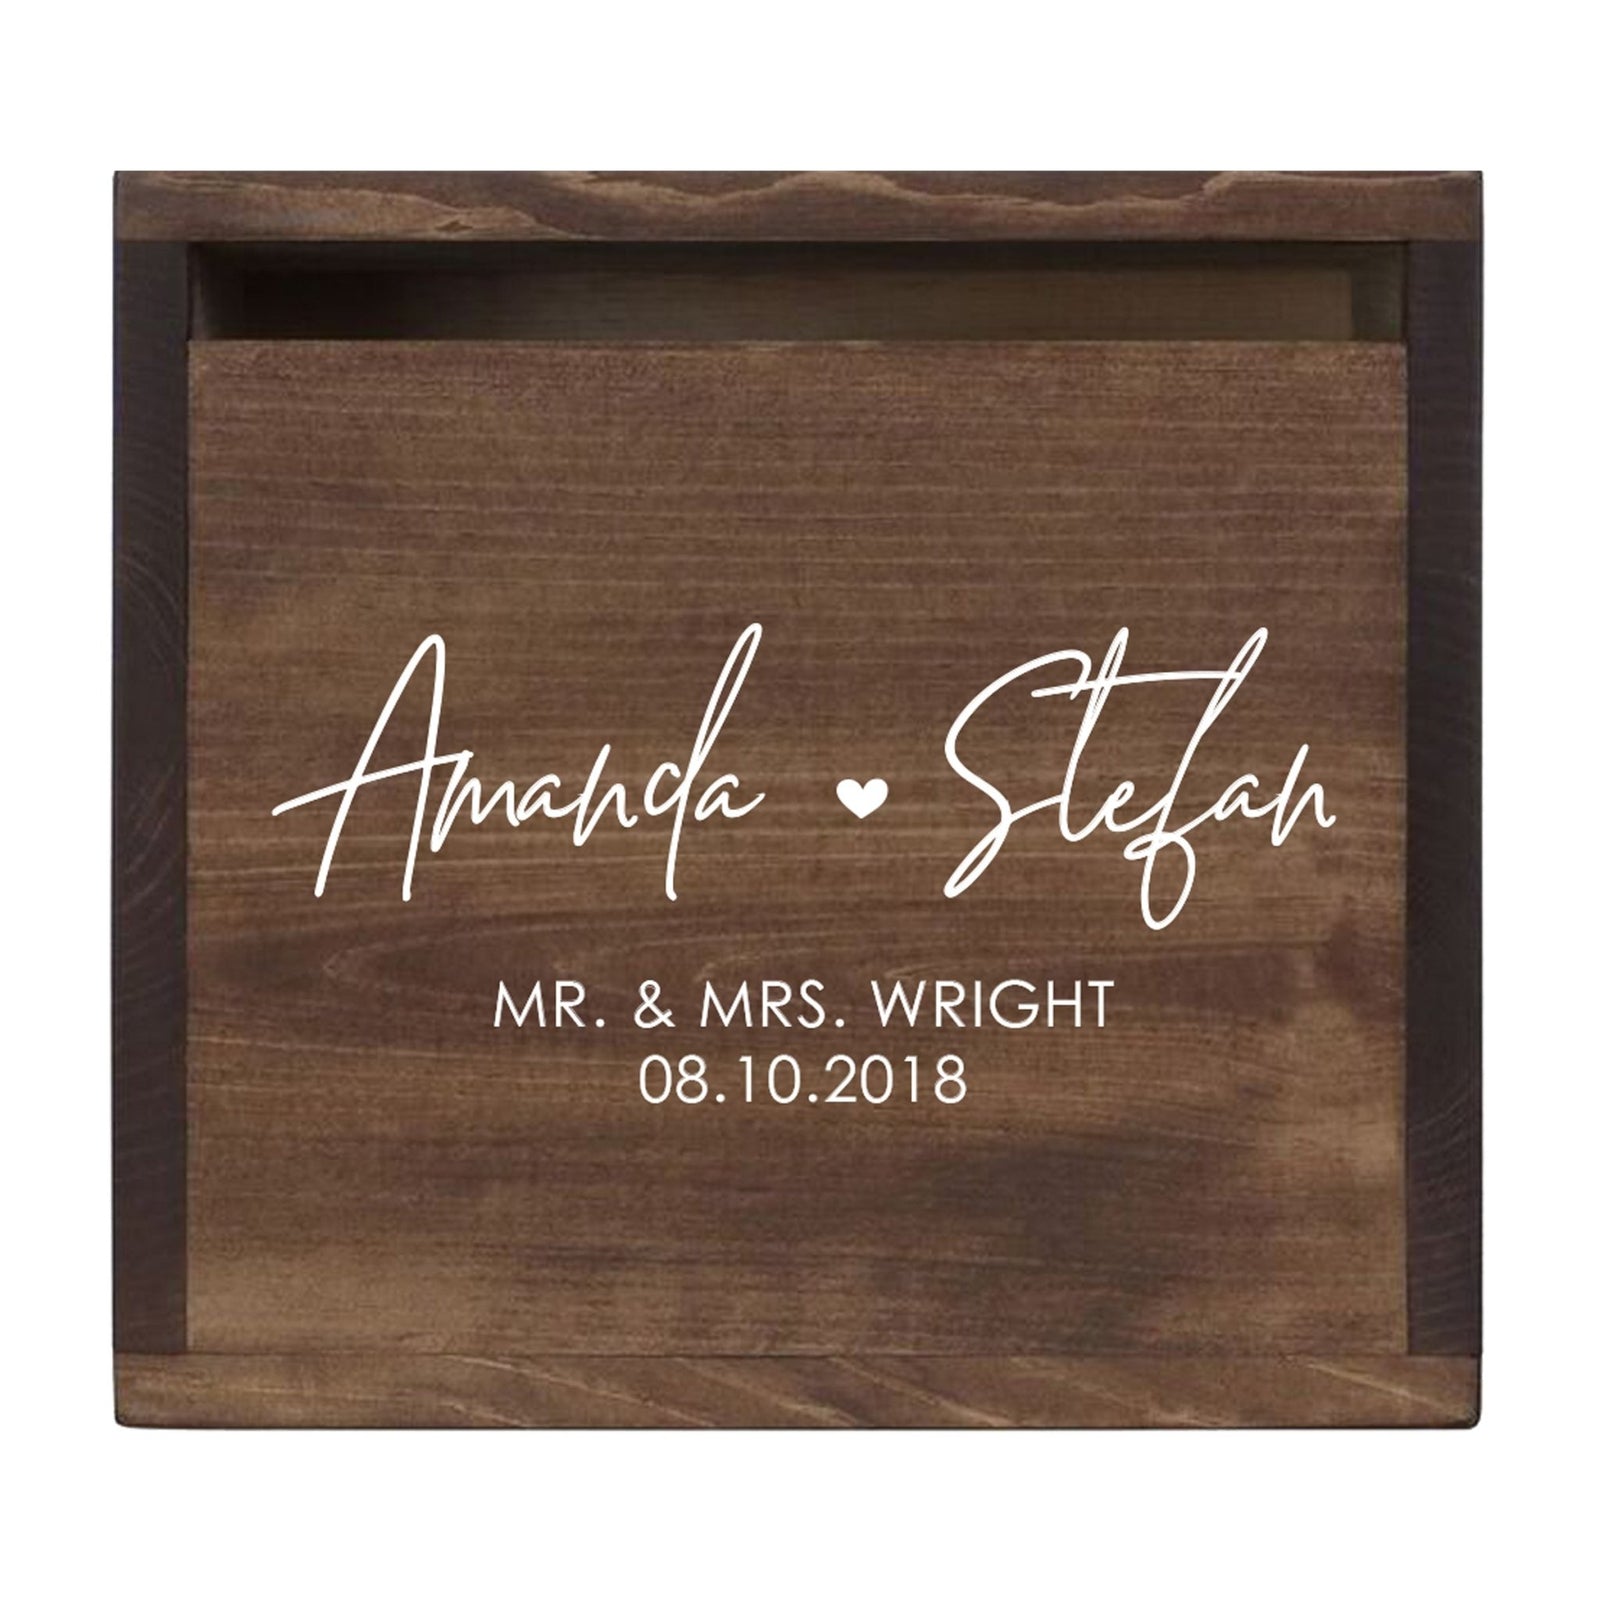 Personalized Wooden Card Box for Wedding Ceremonies, Venues, Receptions, Bridal Showers, and Engagement Parties 13.5x12 - Amanda & Stefan (Heart) - LifeSong Milestones